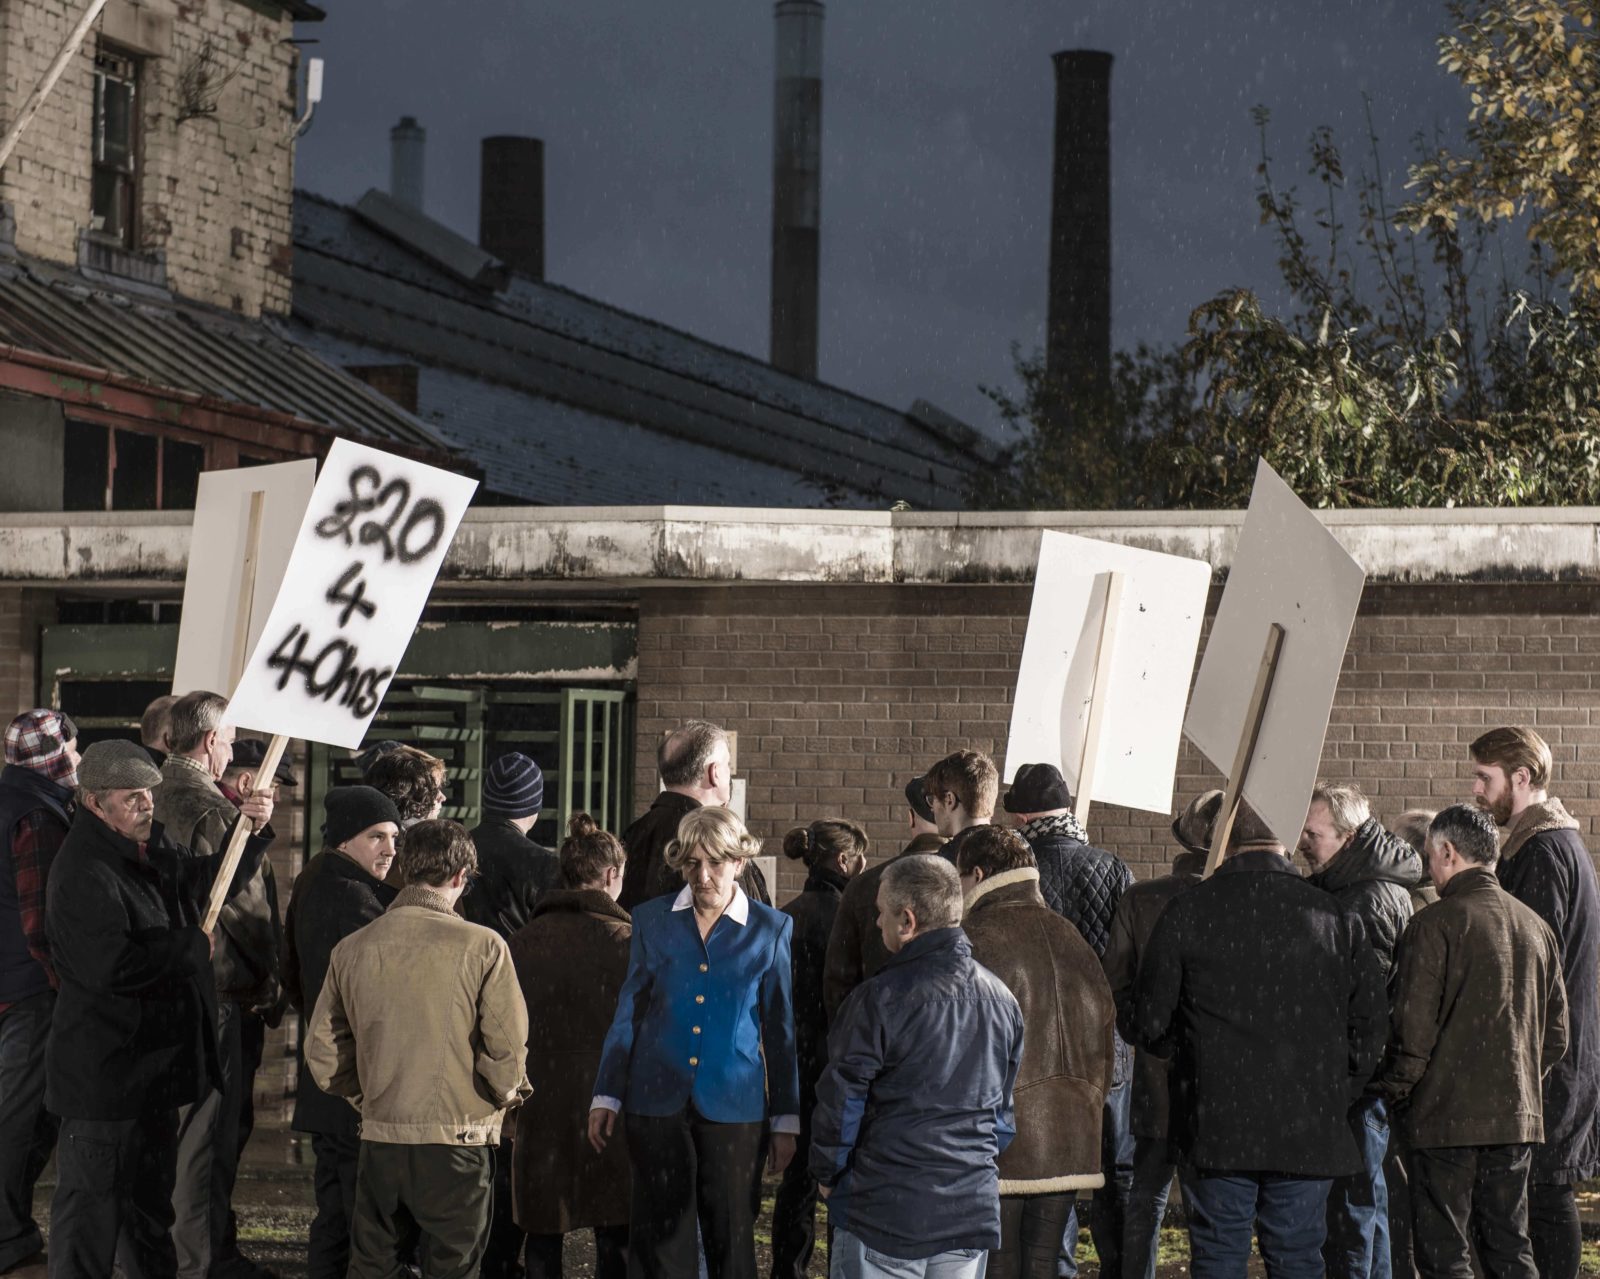 In front of a factory turnstile a crowd of people gather facing away from us. Some are holding placards. One placard reads '£20 for 40 Hours". In the middle of the crowd a woman in a blue jacket walks towards us, looking nervous.